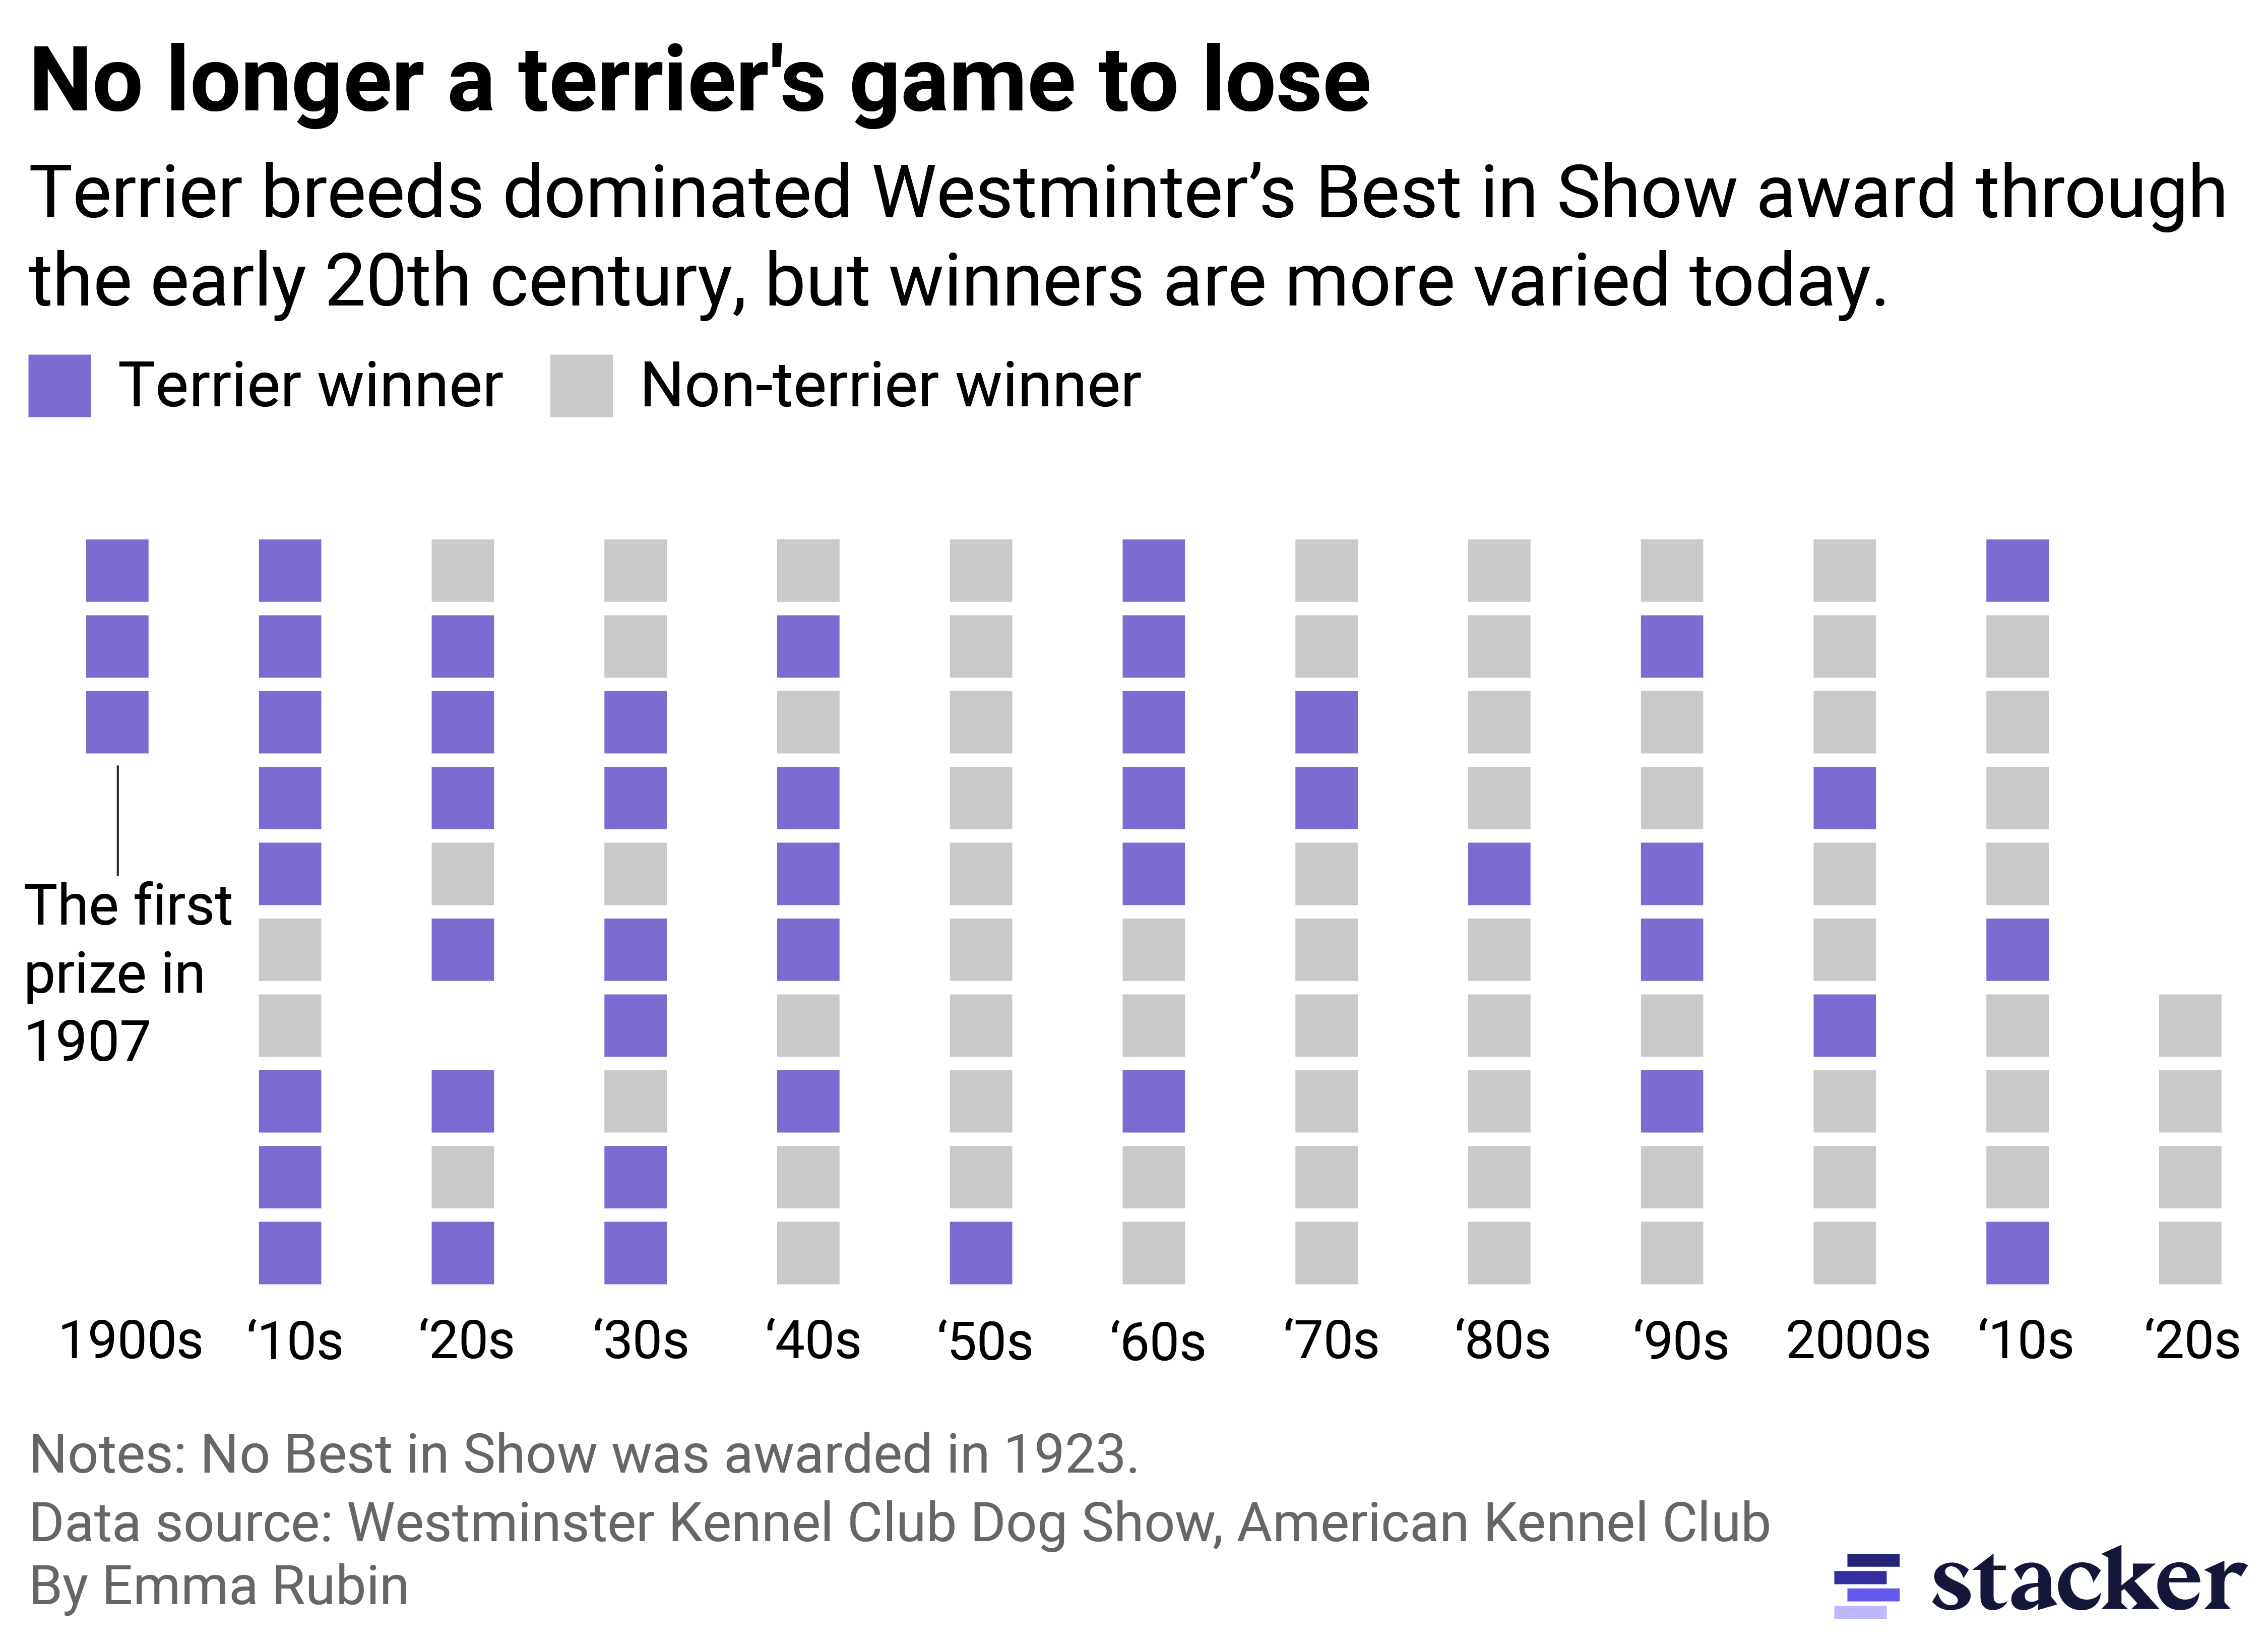 A chart showing the dominance of the terrier group's dominance in Westminster's Best in Show competition. They used to be the majority of winners in the early 20th century, but winners are more varied today.